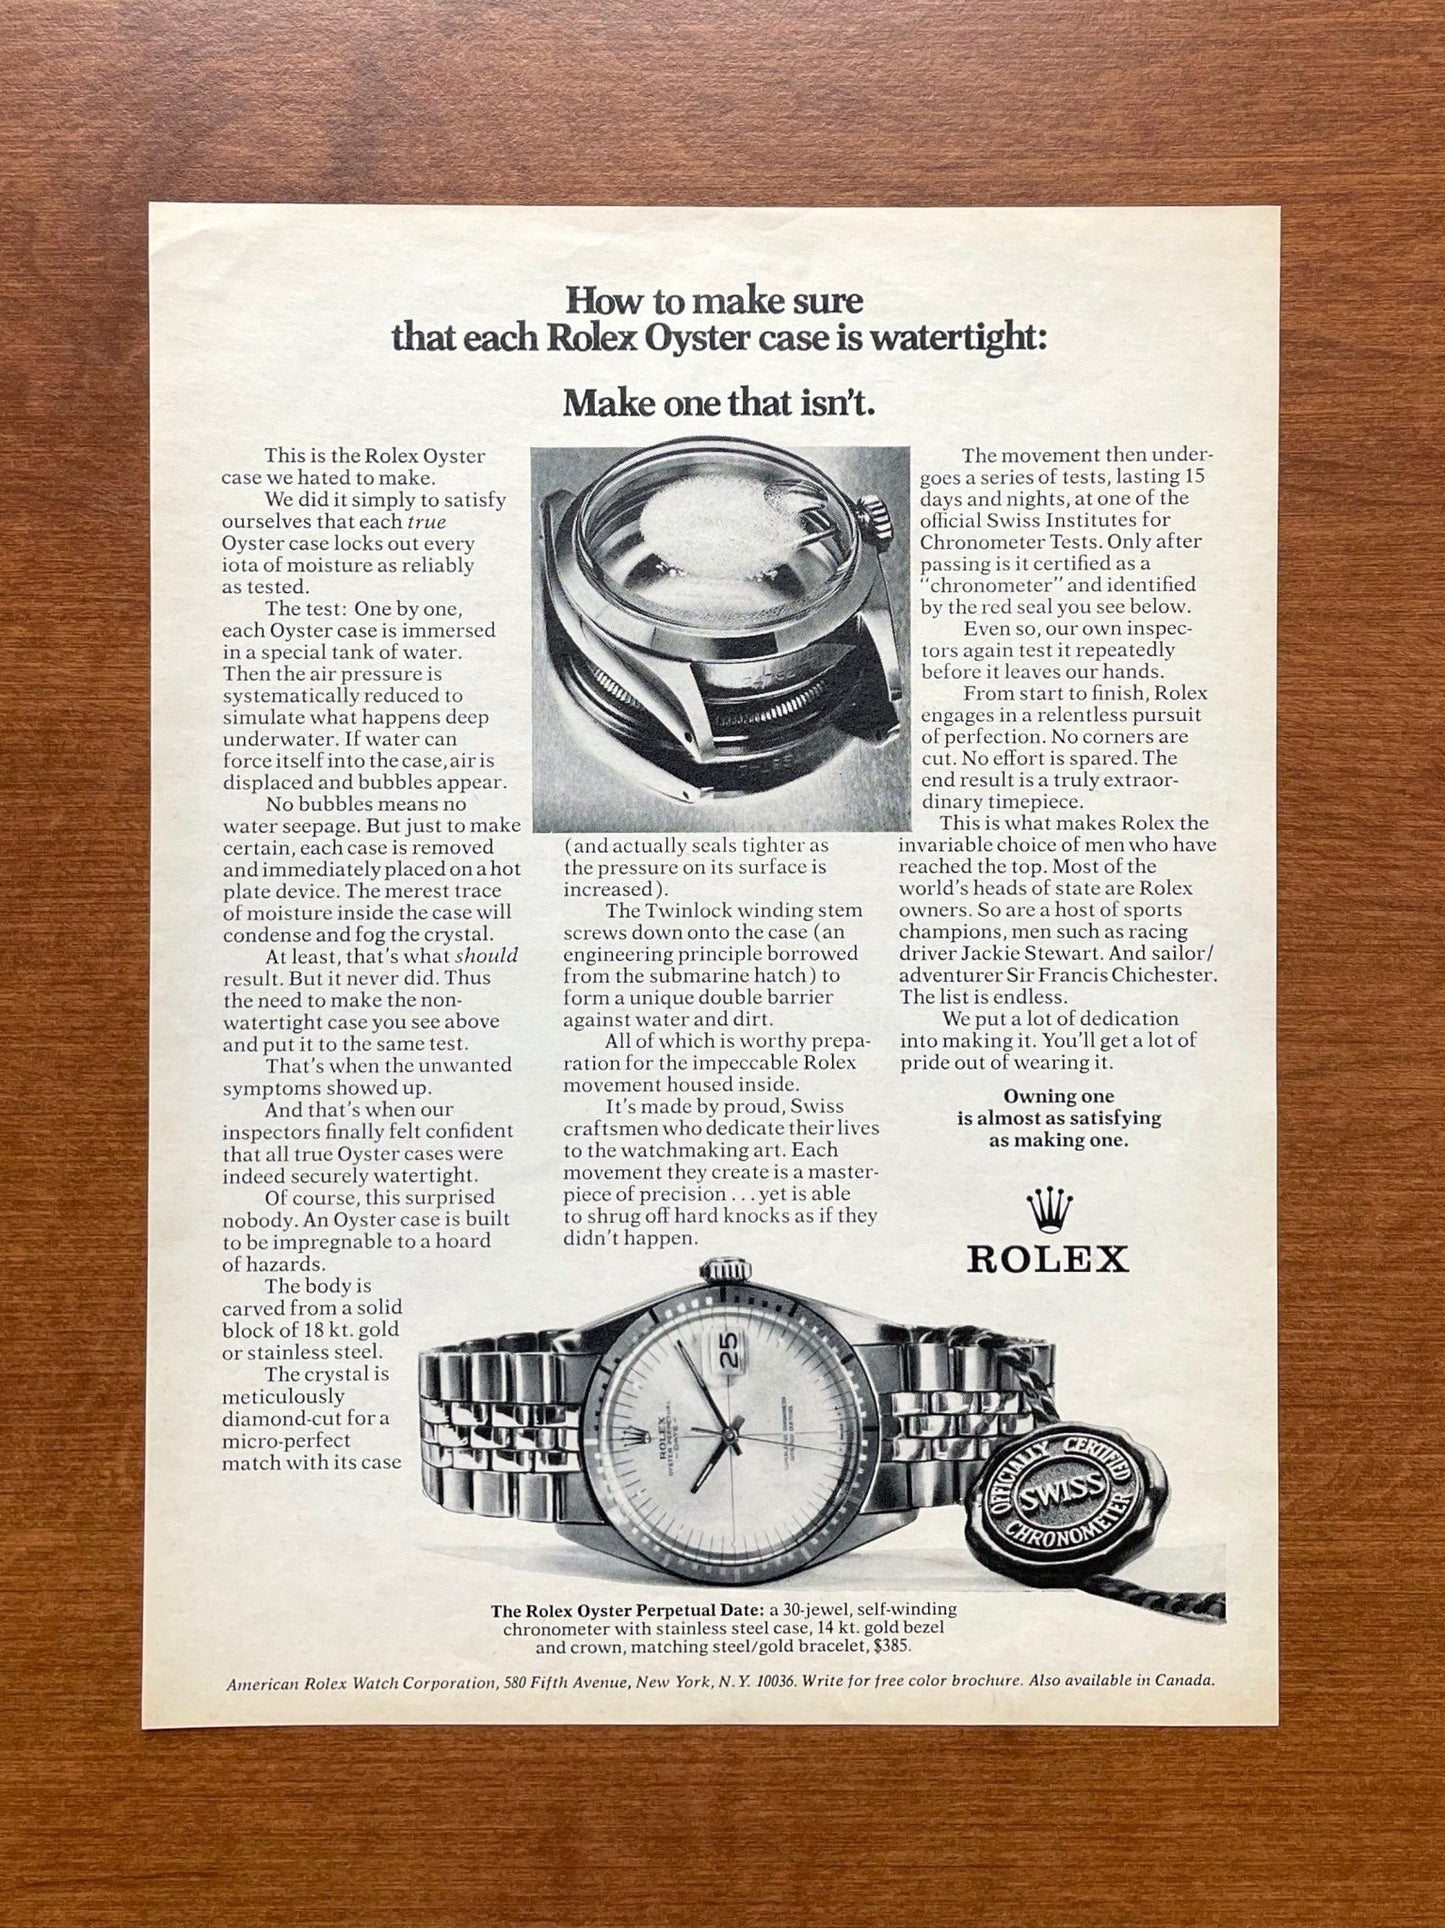 1972 Rolex Oyster Perpetual Date "Make one that isn't." Advertisement